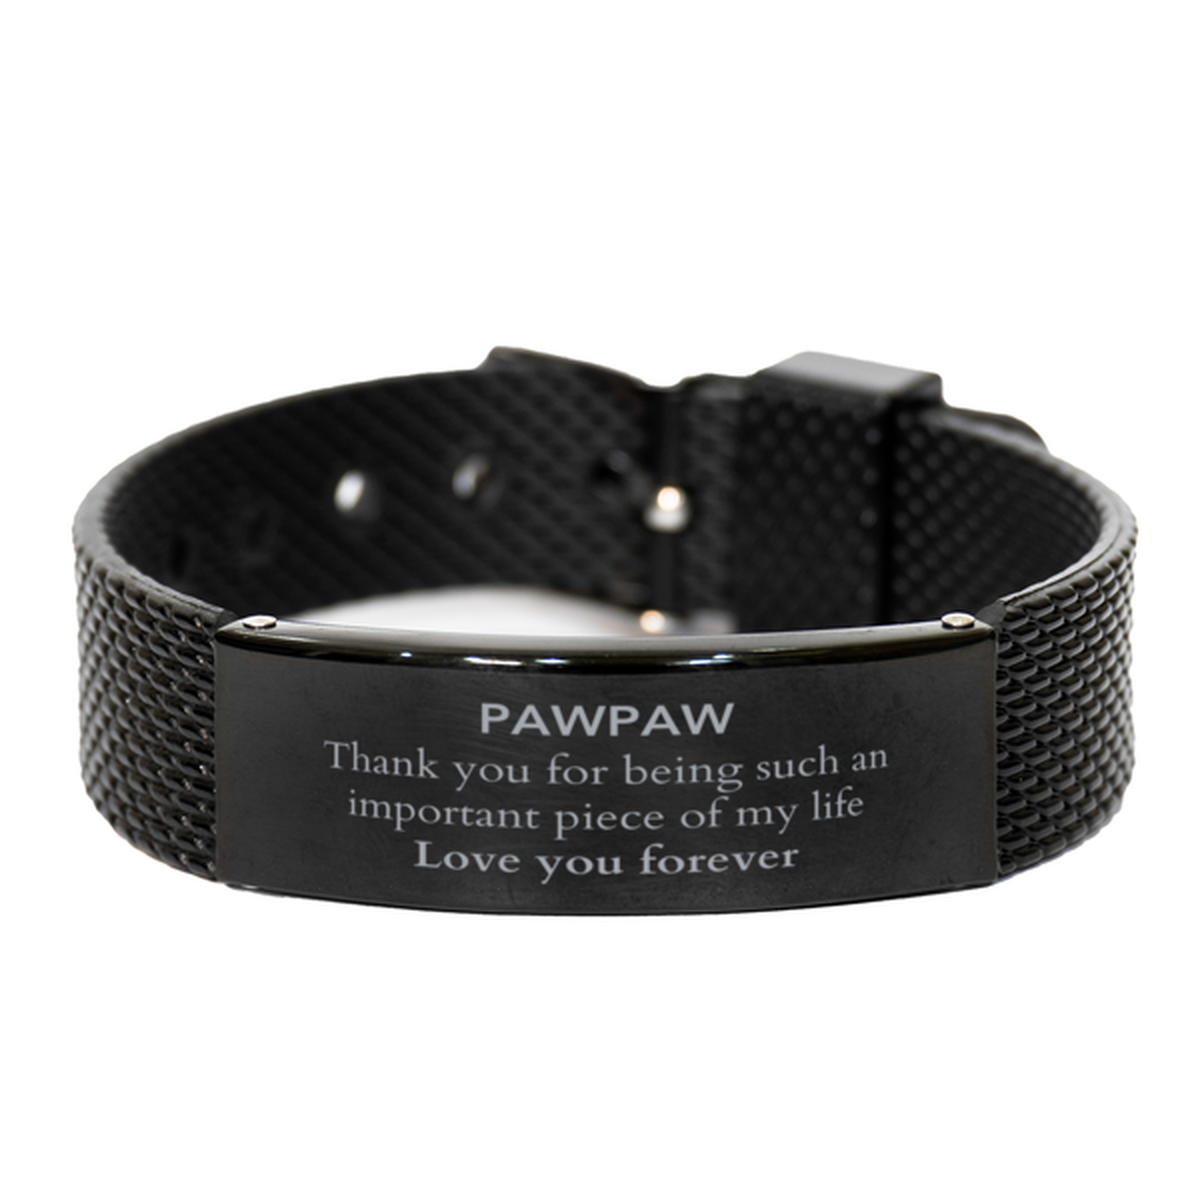 Appropriate Pawpaw Black Shark Mesh Bracelet Epic Birthday Gifts for Pawpaw Thank you for being such an important piece of my life Pawpaw Christmas Mothers Fathers Day